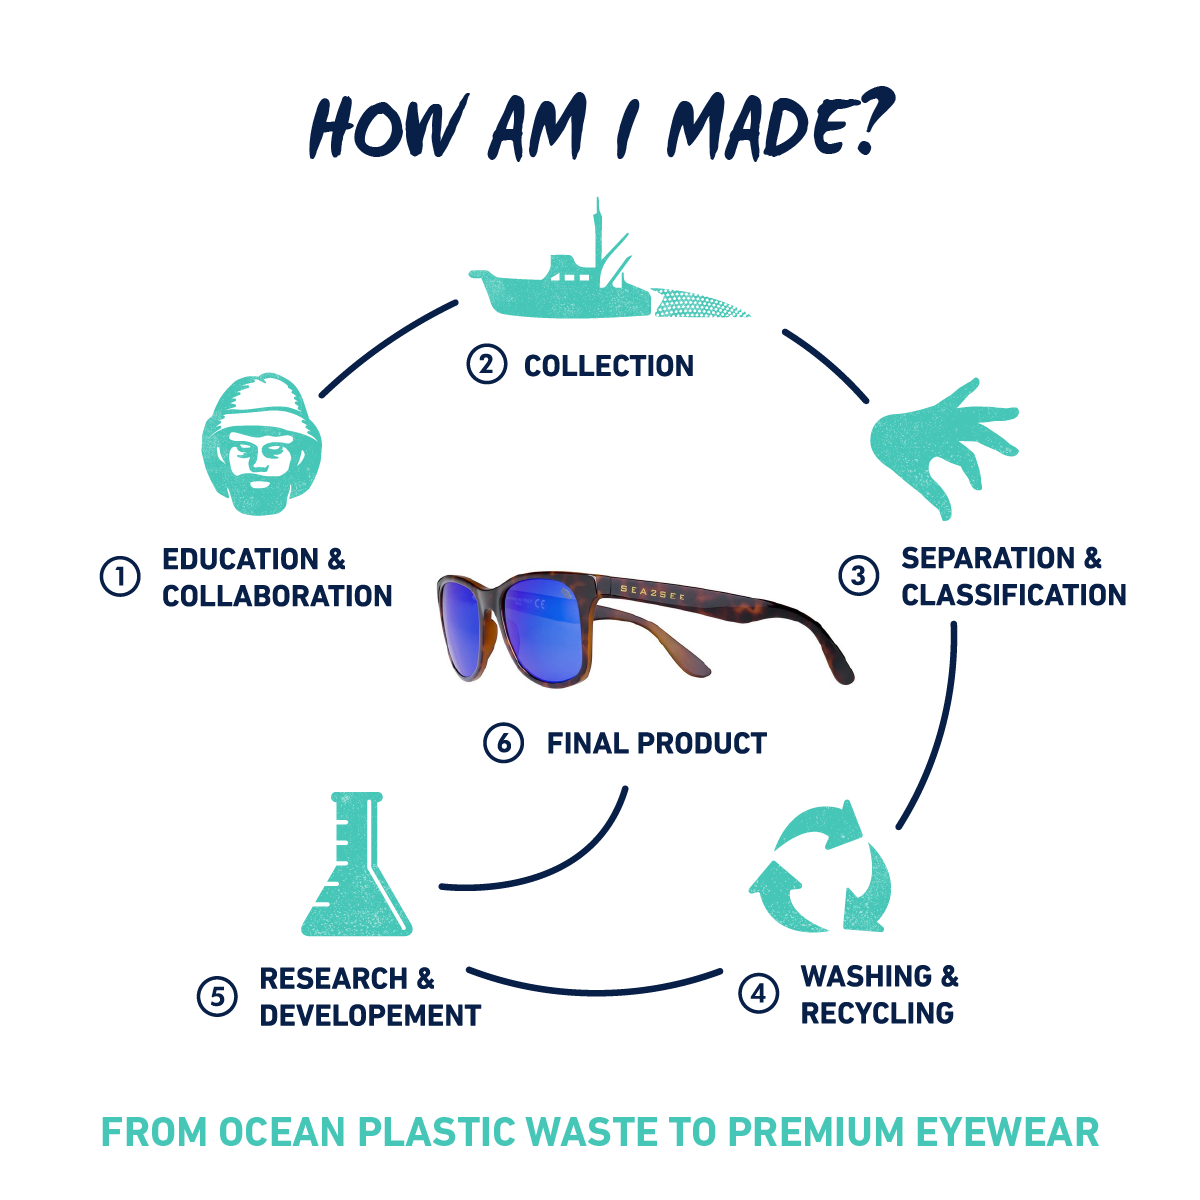 CONVERTING PLASTIC WASTE FROM THE OCEAN INTO PREMIUM GLASSES IN 6 STEPS